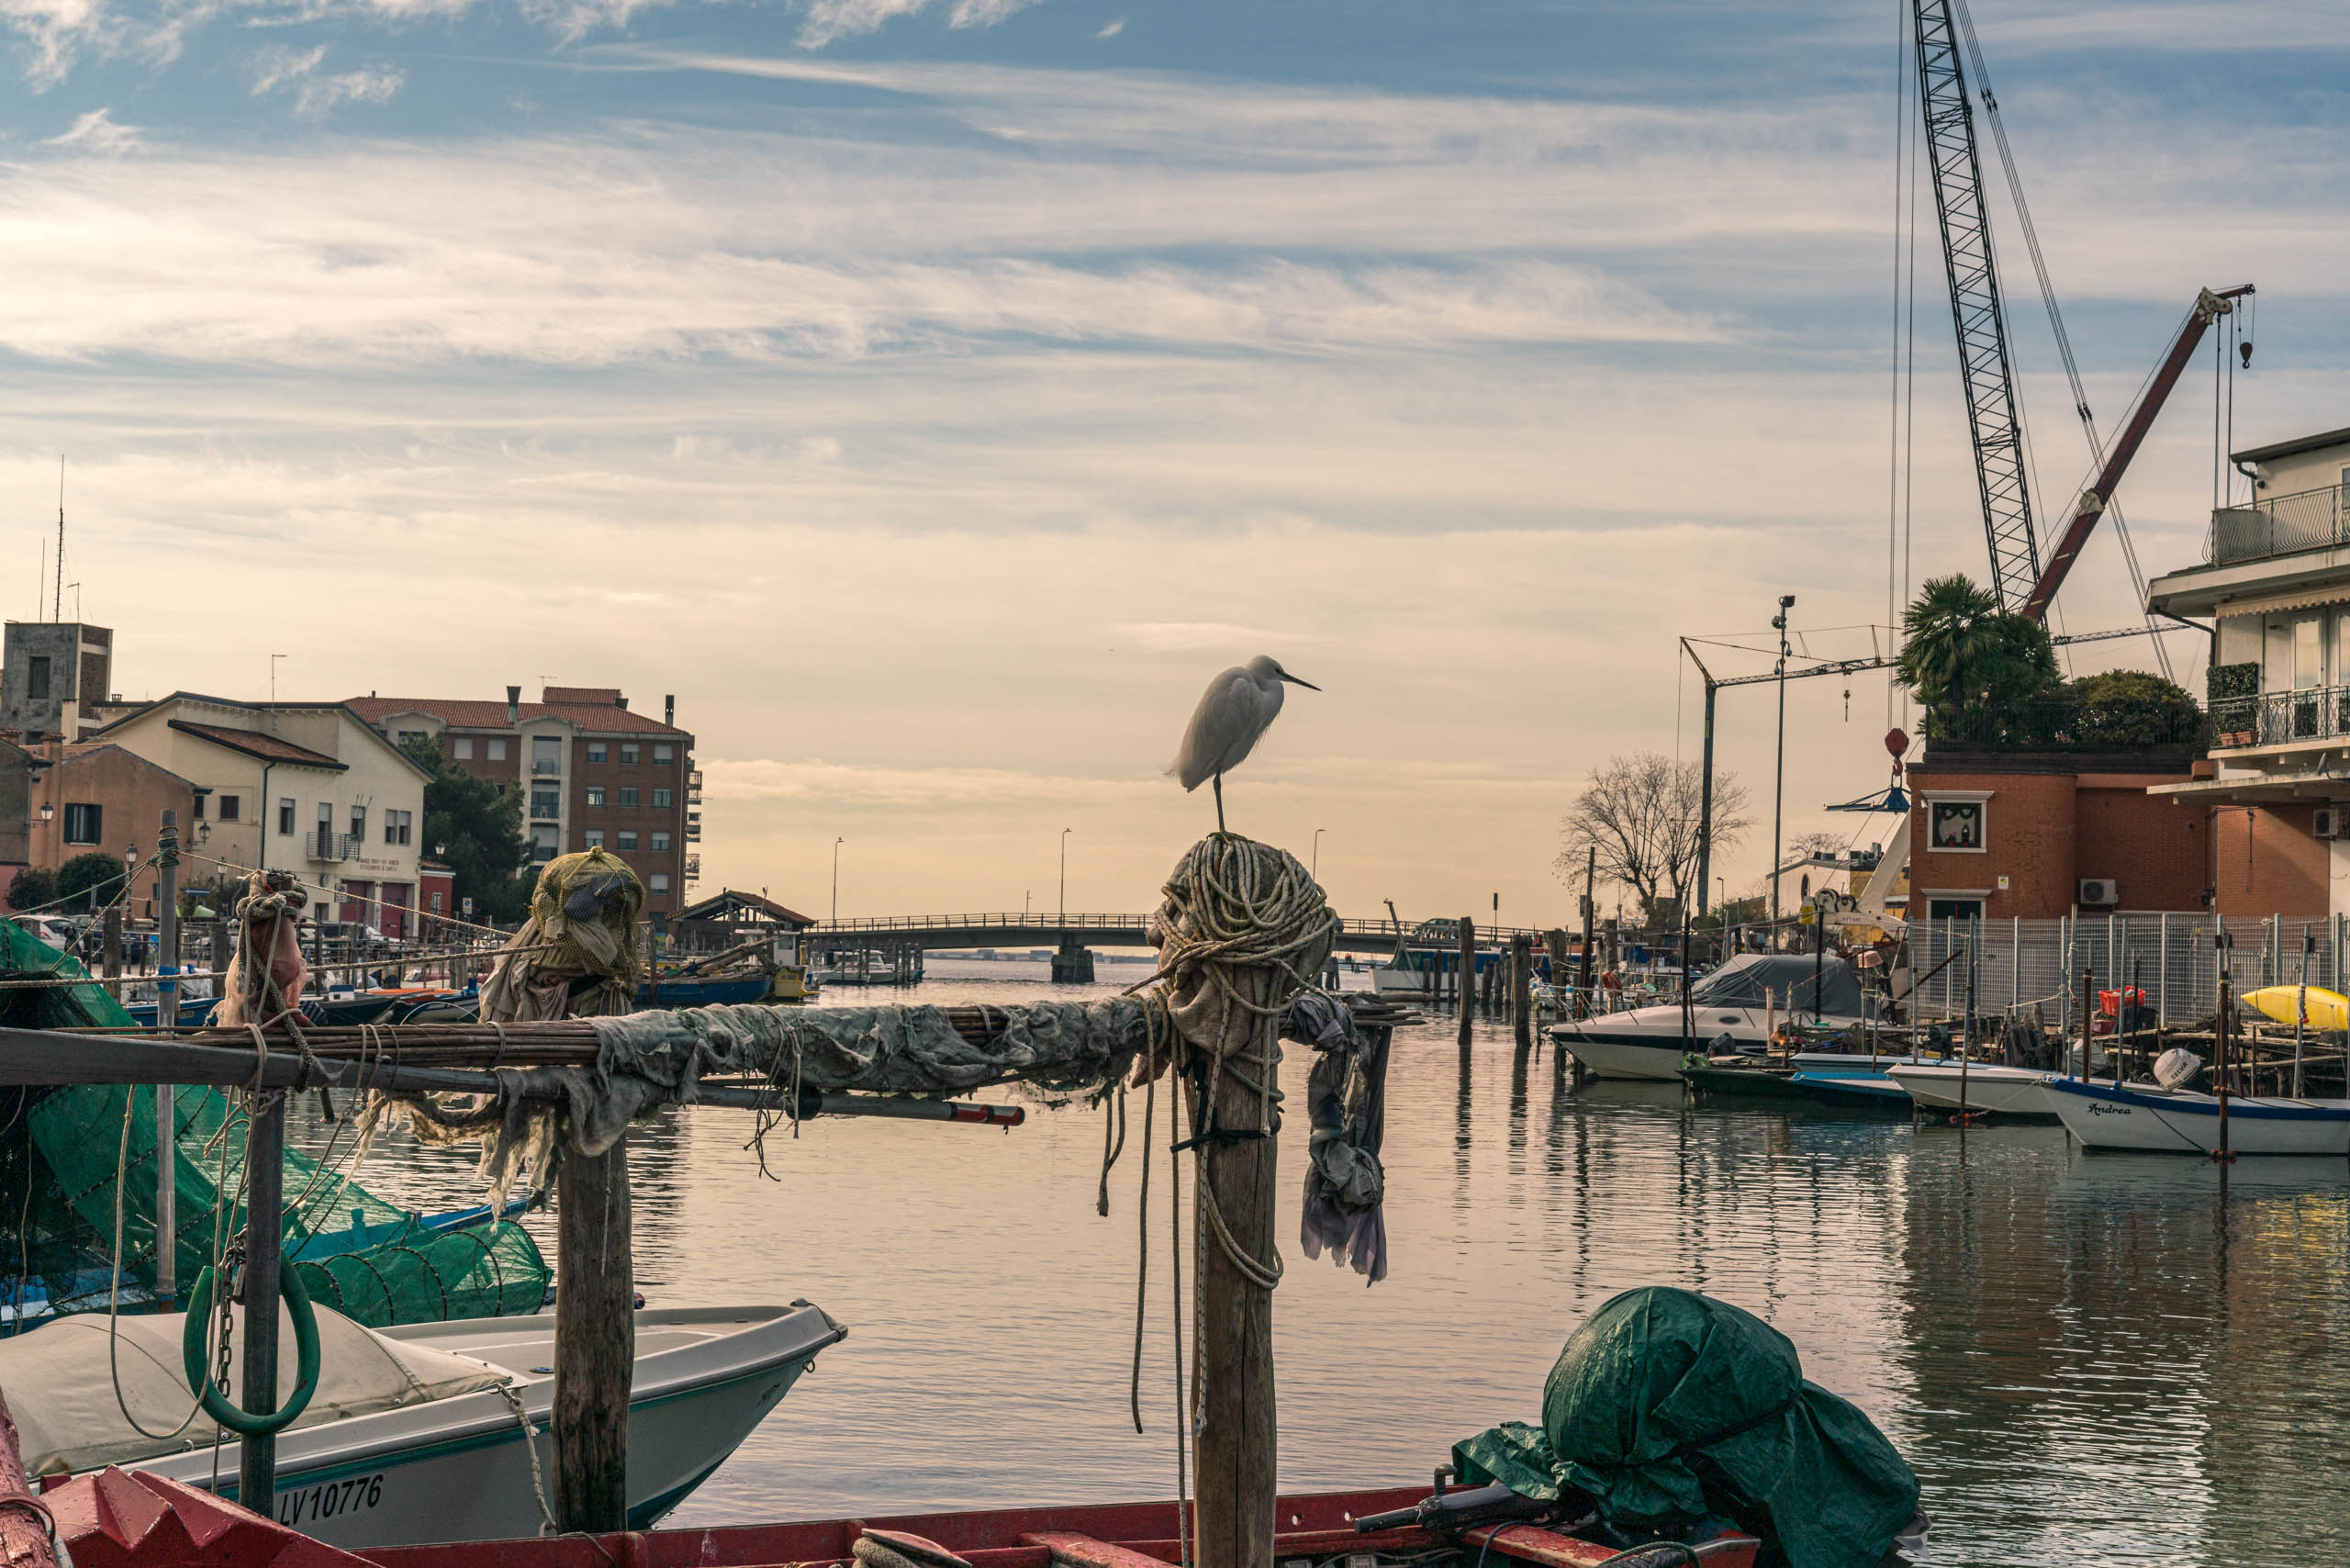 Travel and street photography of Venice or Venezia, Italy made by New York photographer Mary Catherine Messner (mcmessner).